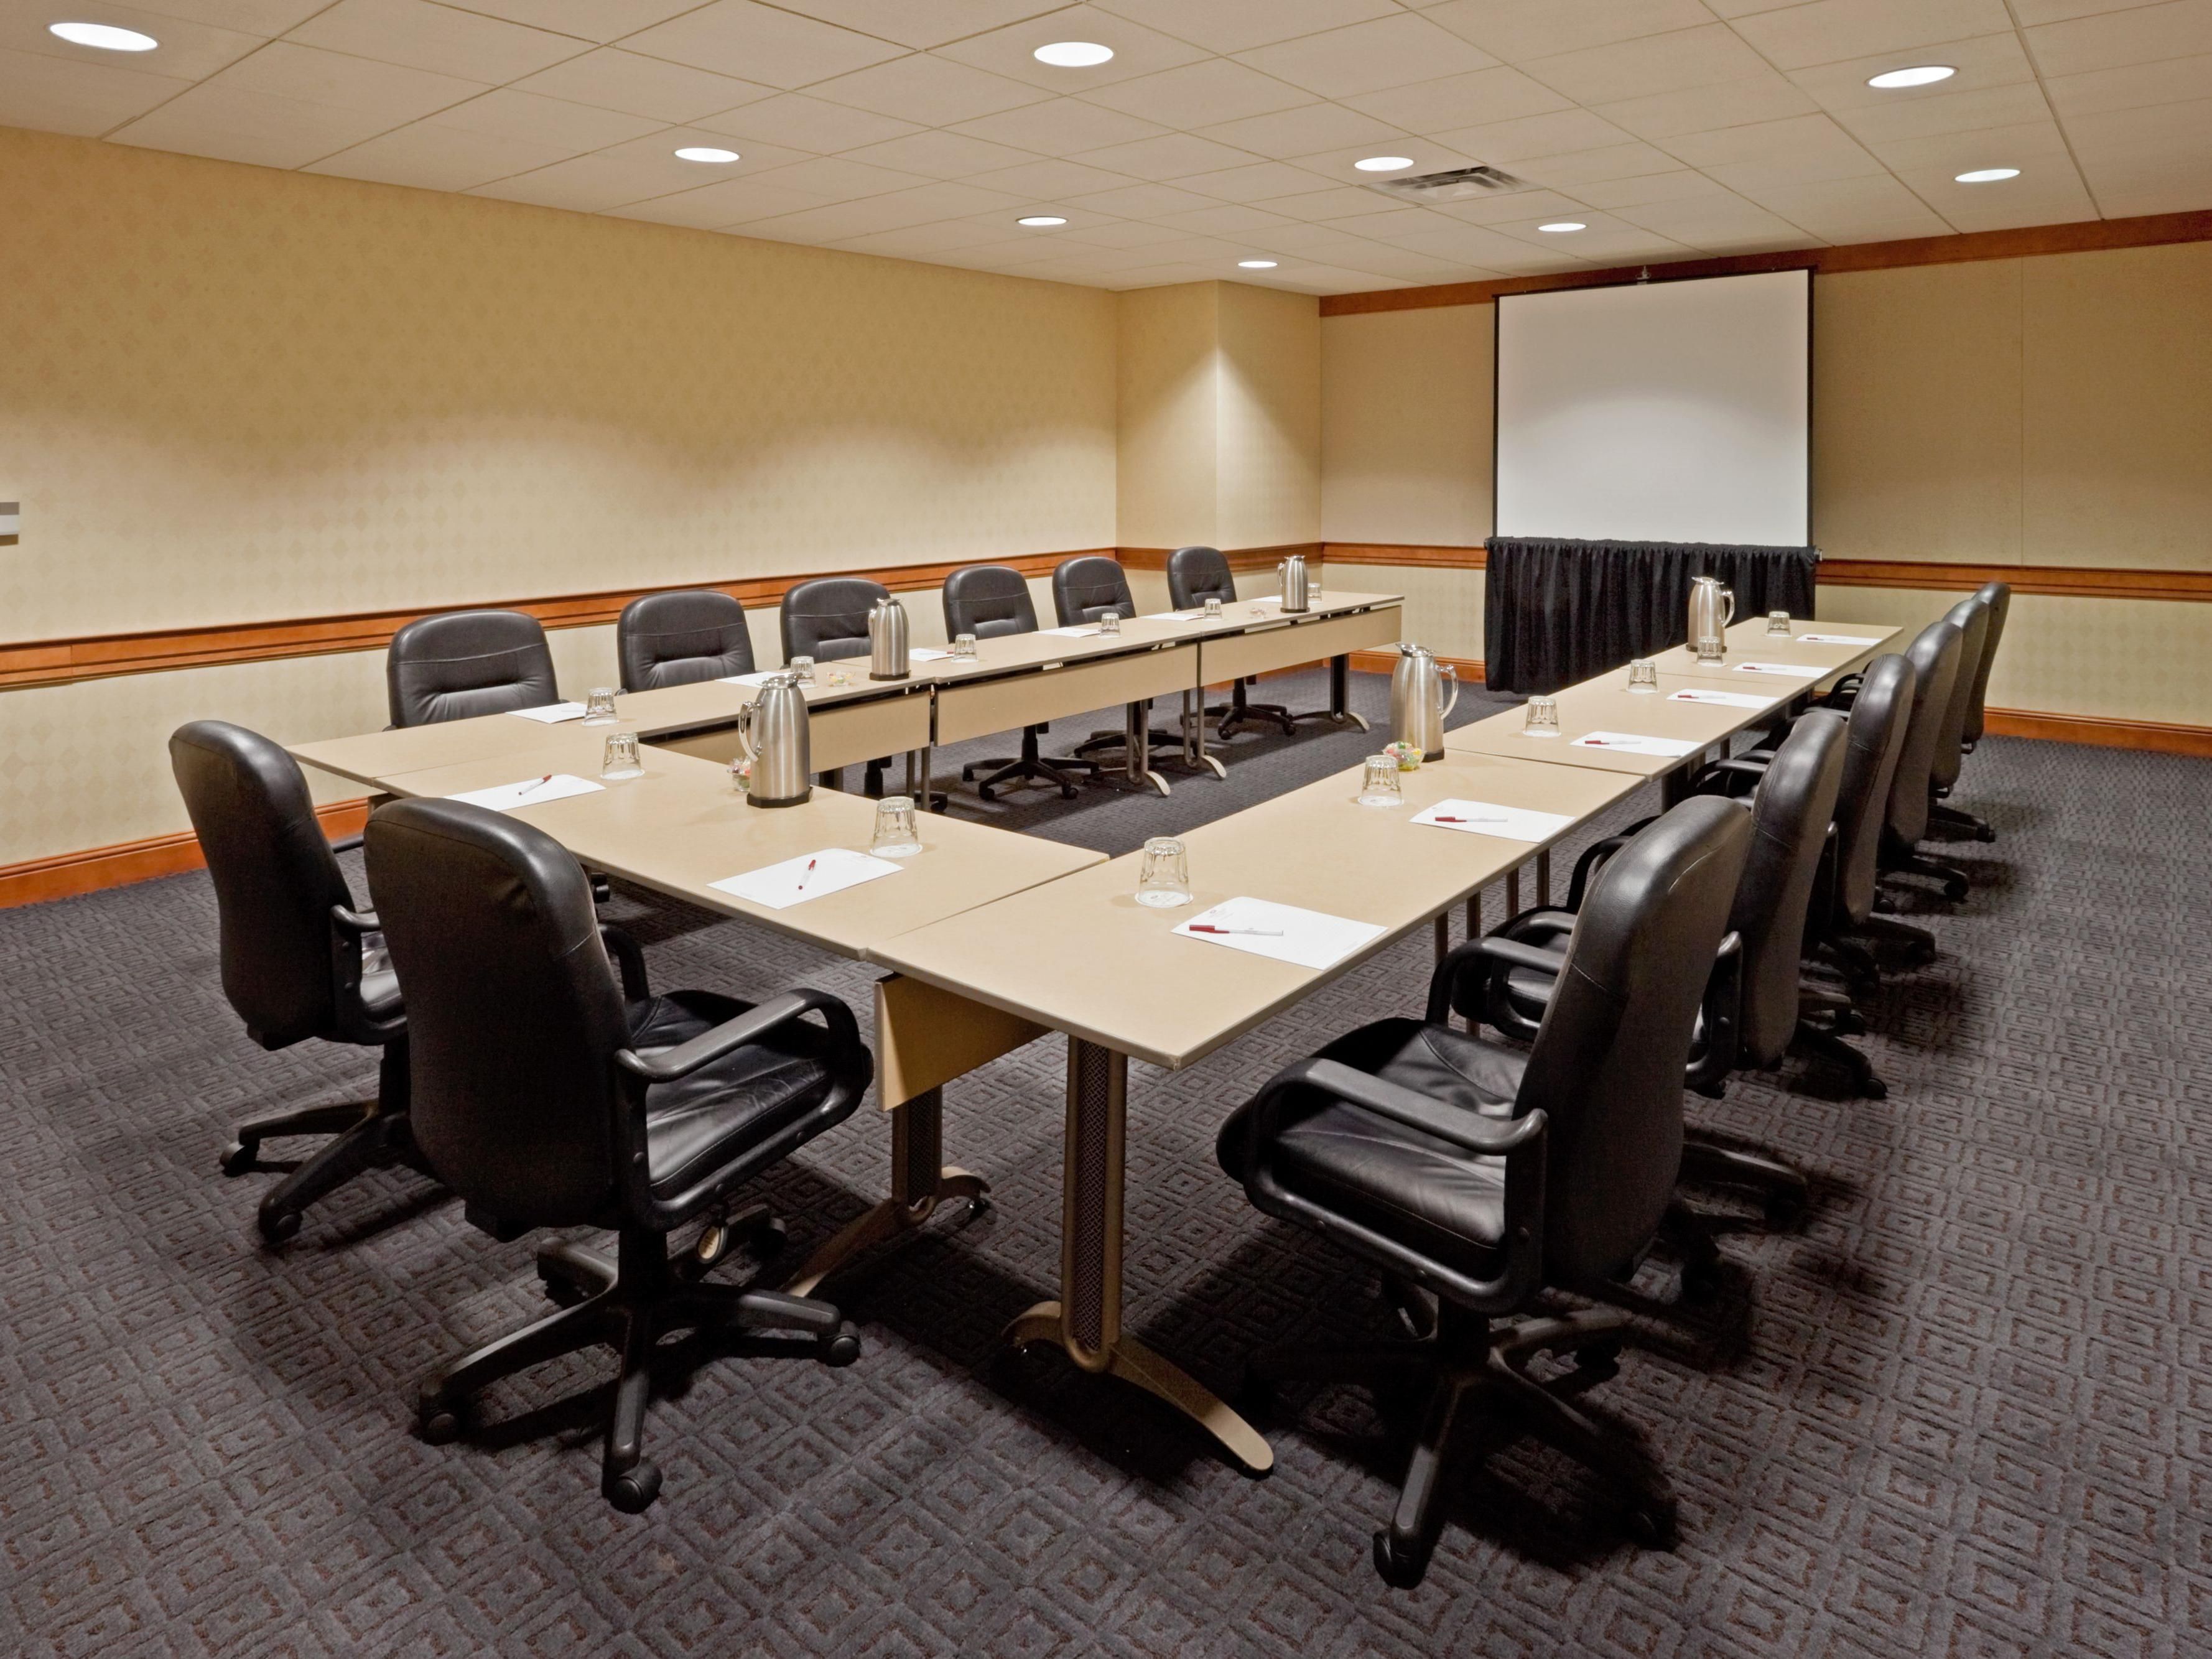 Host your hybrid or in-person meetings and events at Crowne Plaza® Philadelphia - King of Prussia. Our hotel offers 24,000 square feet of flexible meeting space, which includes a staging or pre-function space, as well as an onsite audio-visual production company to make sure your audience sees and hears every detail. 